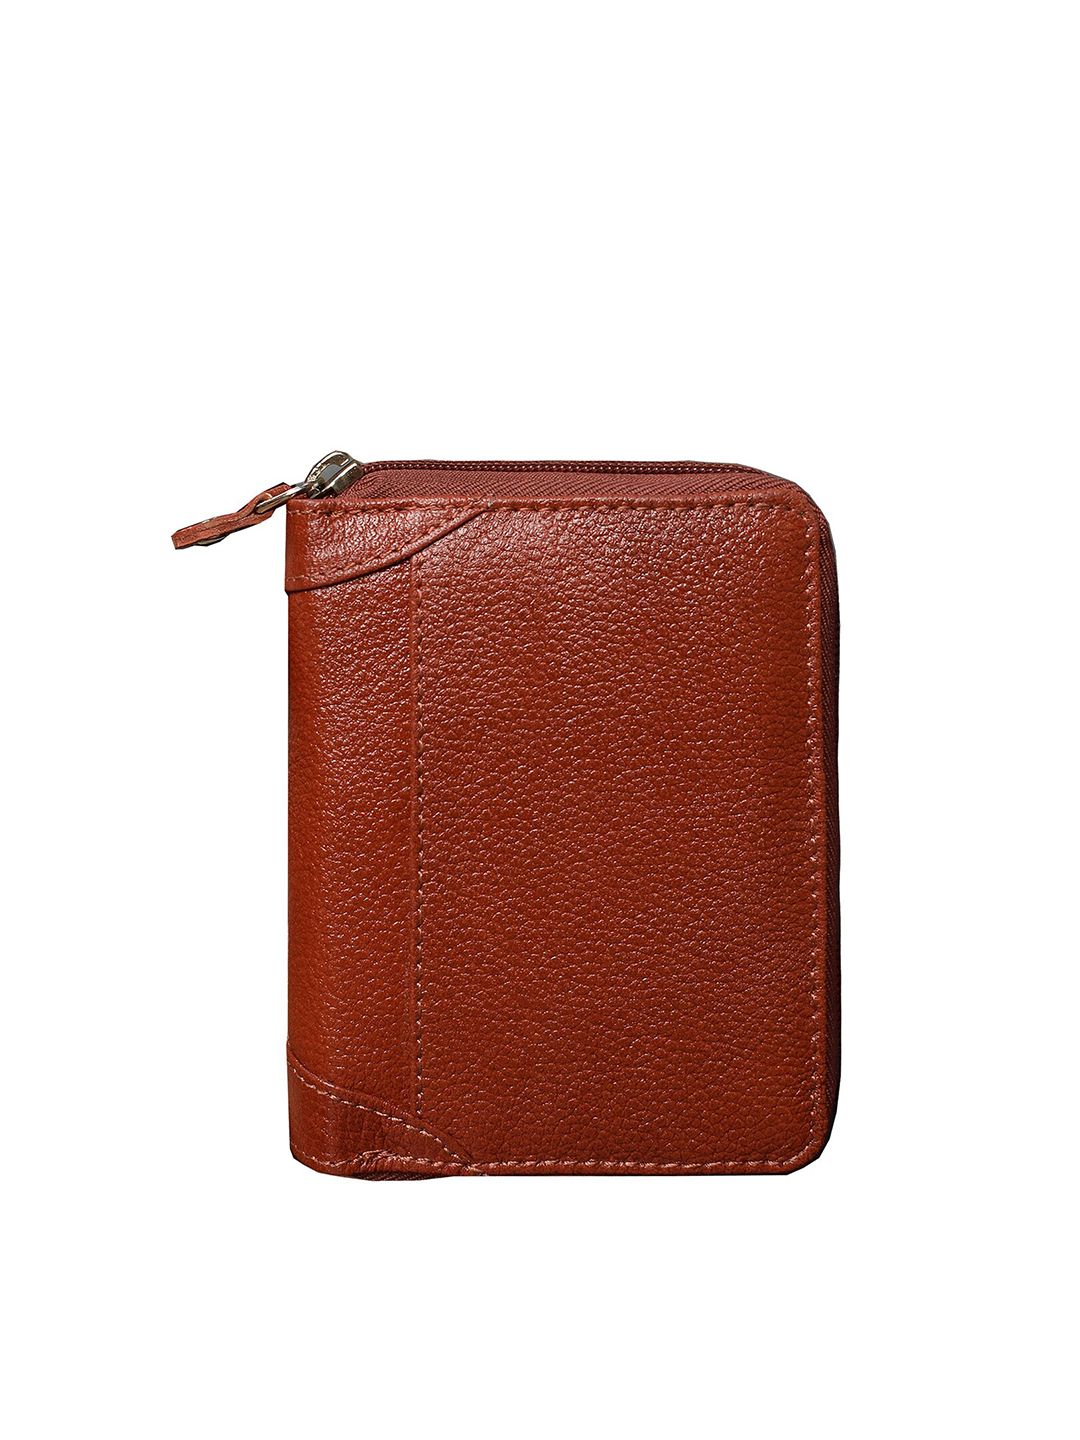 ABYS Unisex Brown Textured Zip Around Leather Wallet Price in India